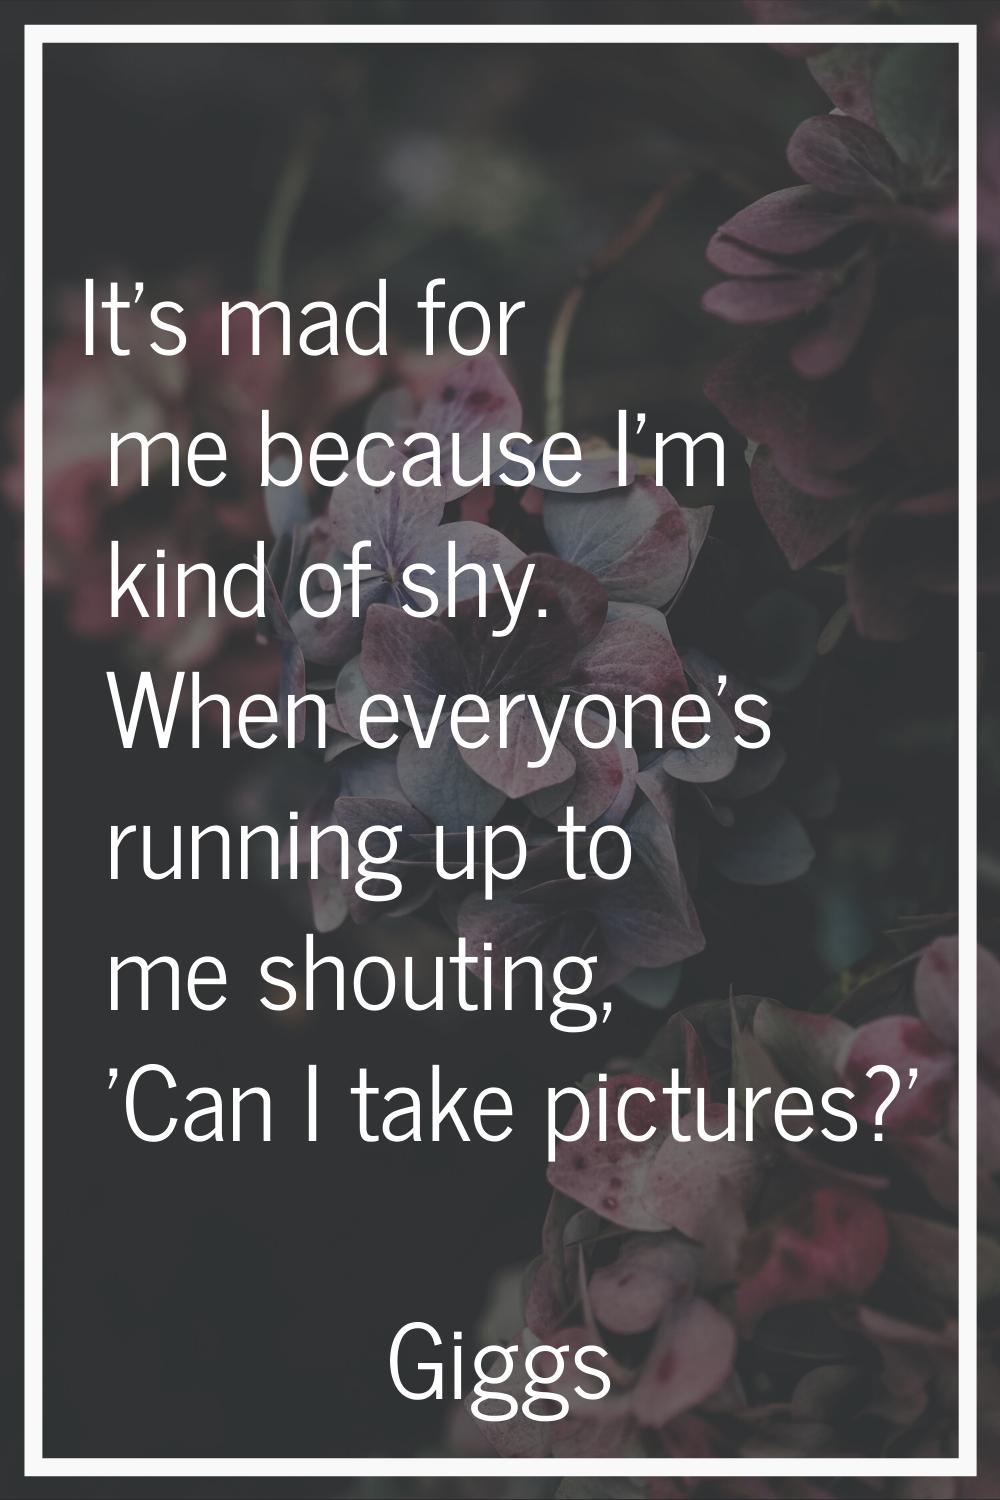 It's mad for me because I'm kind of shy. When everyone's running up to me shouting, 'Can I take pic